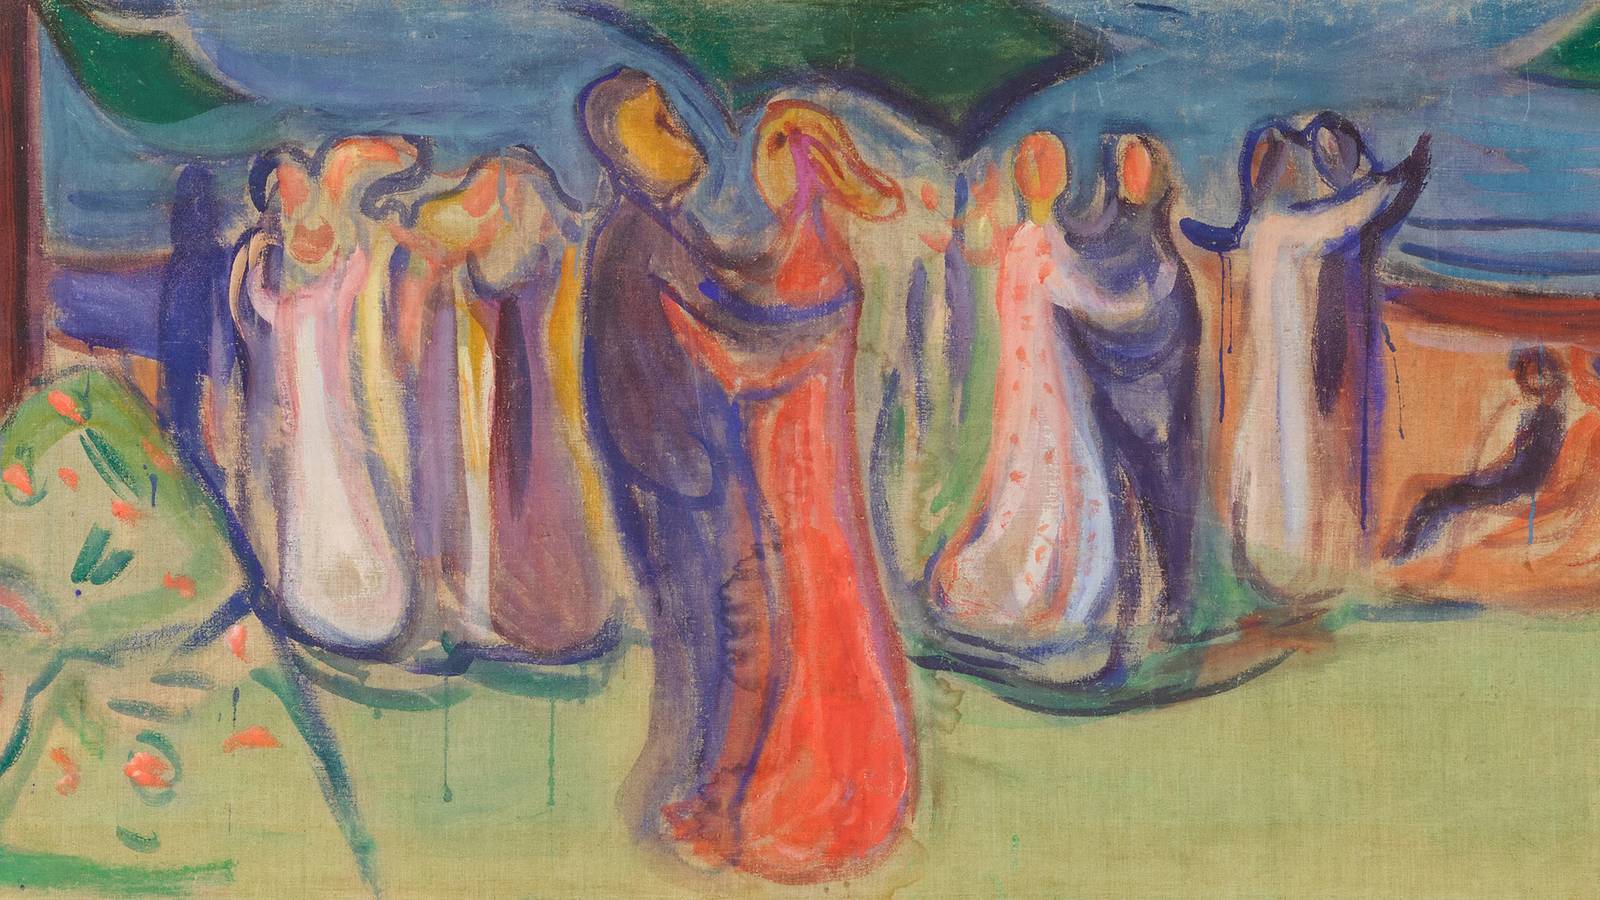 A section of 'Dance on the beach' by Edvard Munch. Photo: Sotheby's.